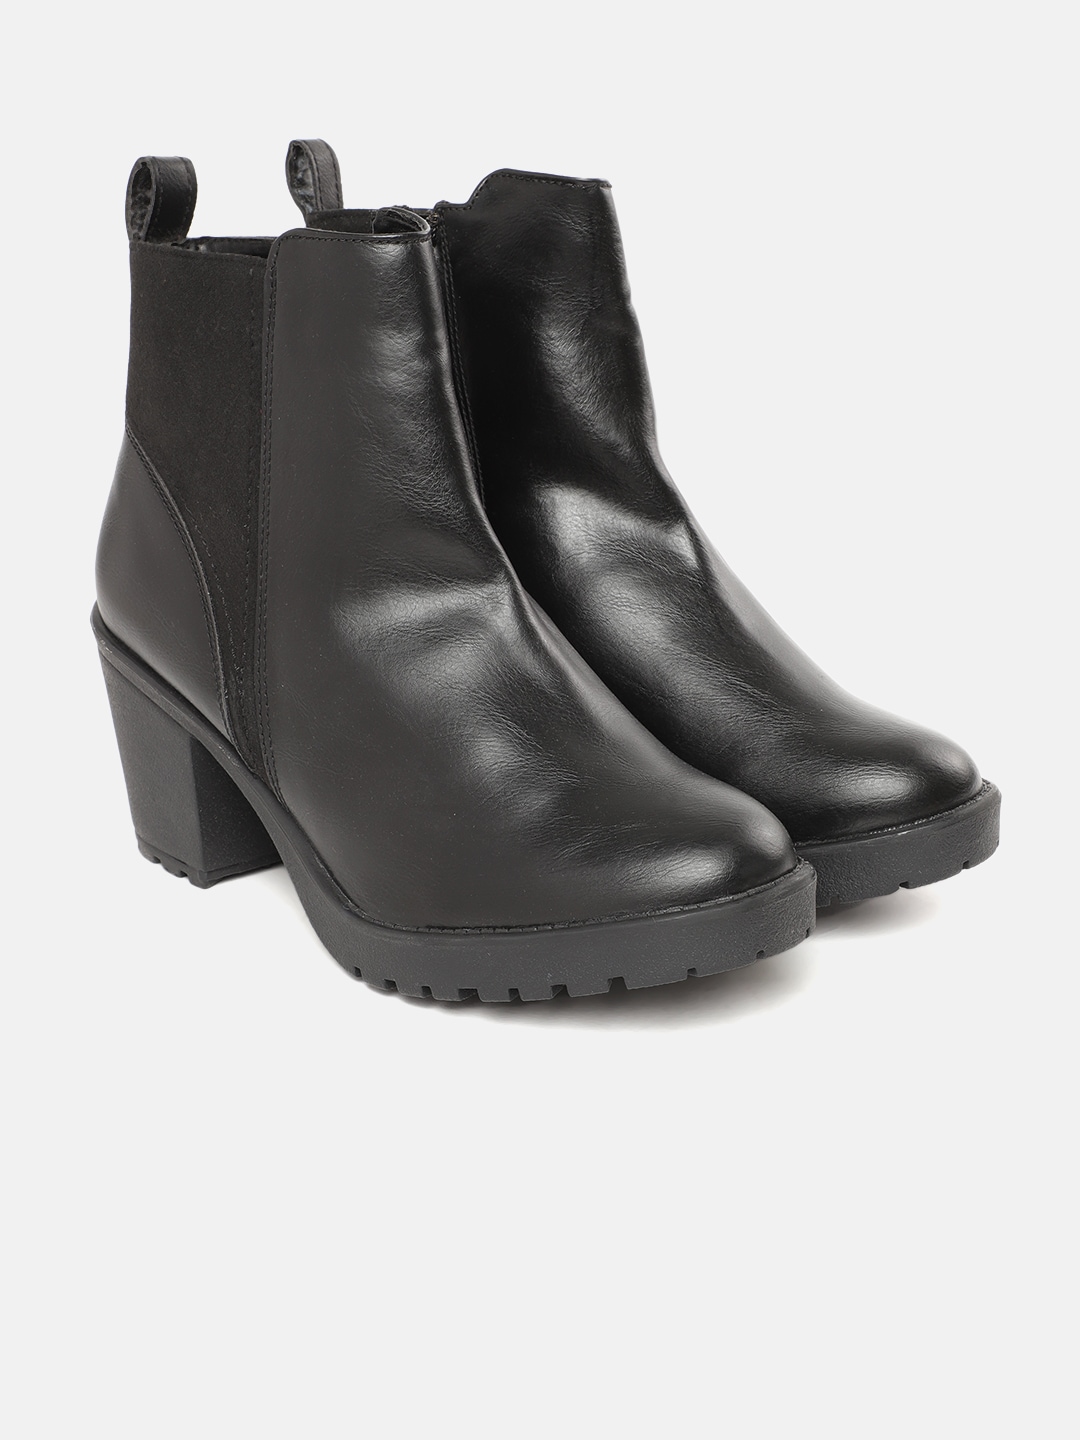 Roadster Black Mid-Top Block Heeled Boots Price in India